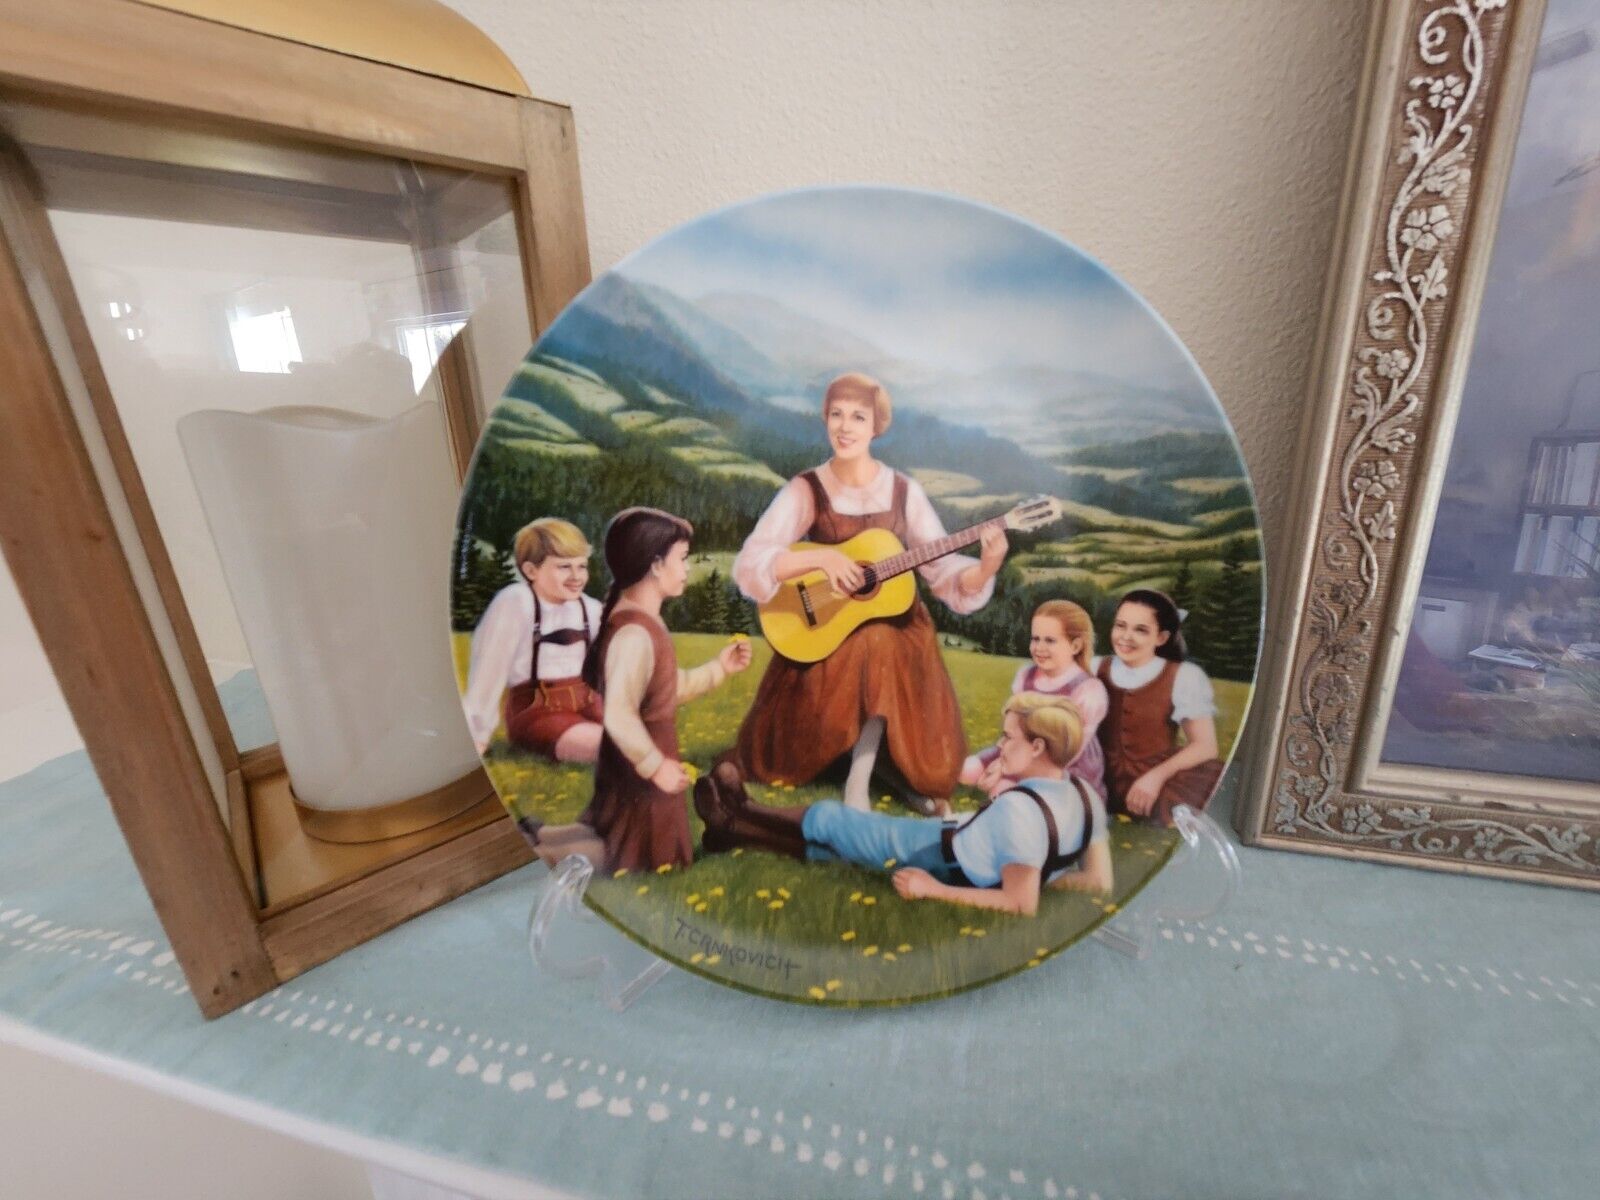 Edwin M. Knowles Collector Plate - The Sound Of Music “Do-Re-Mi” in EUC